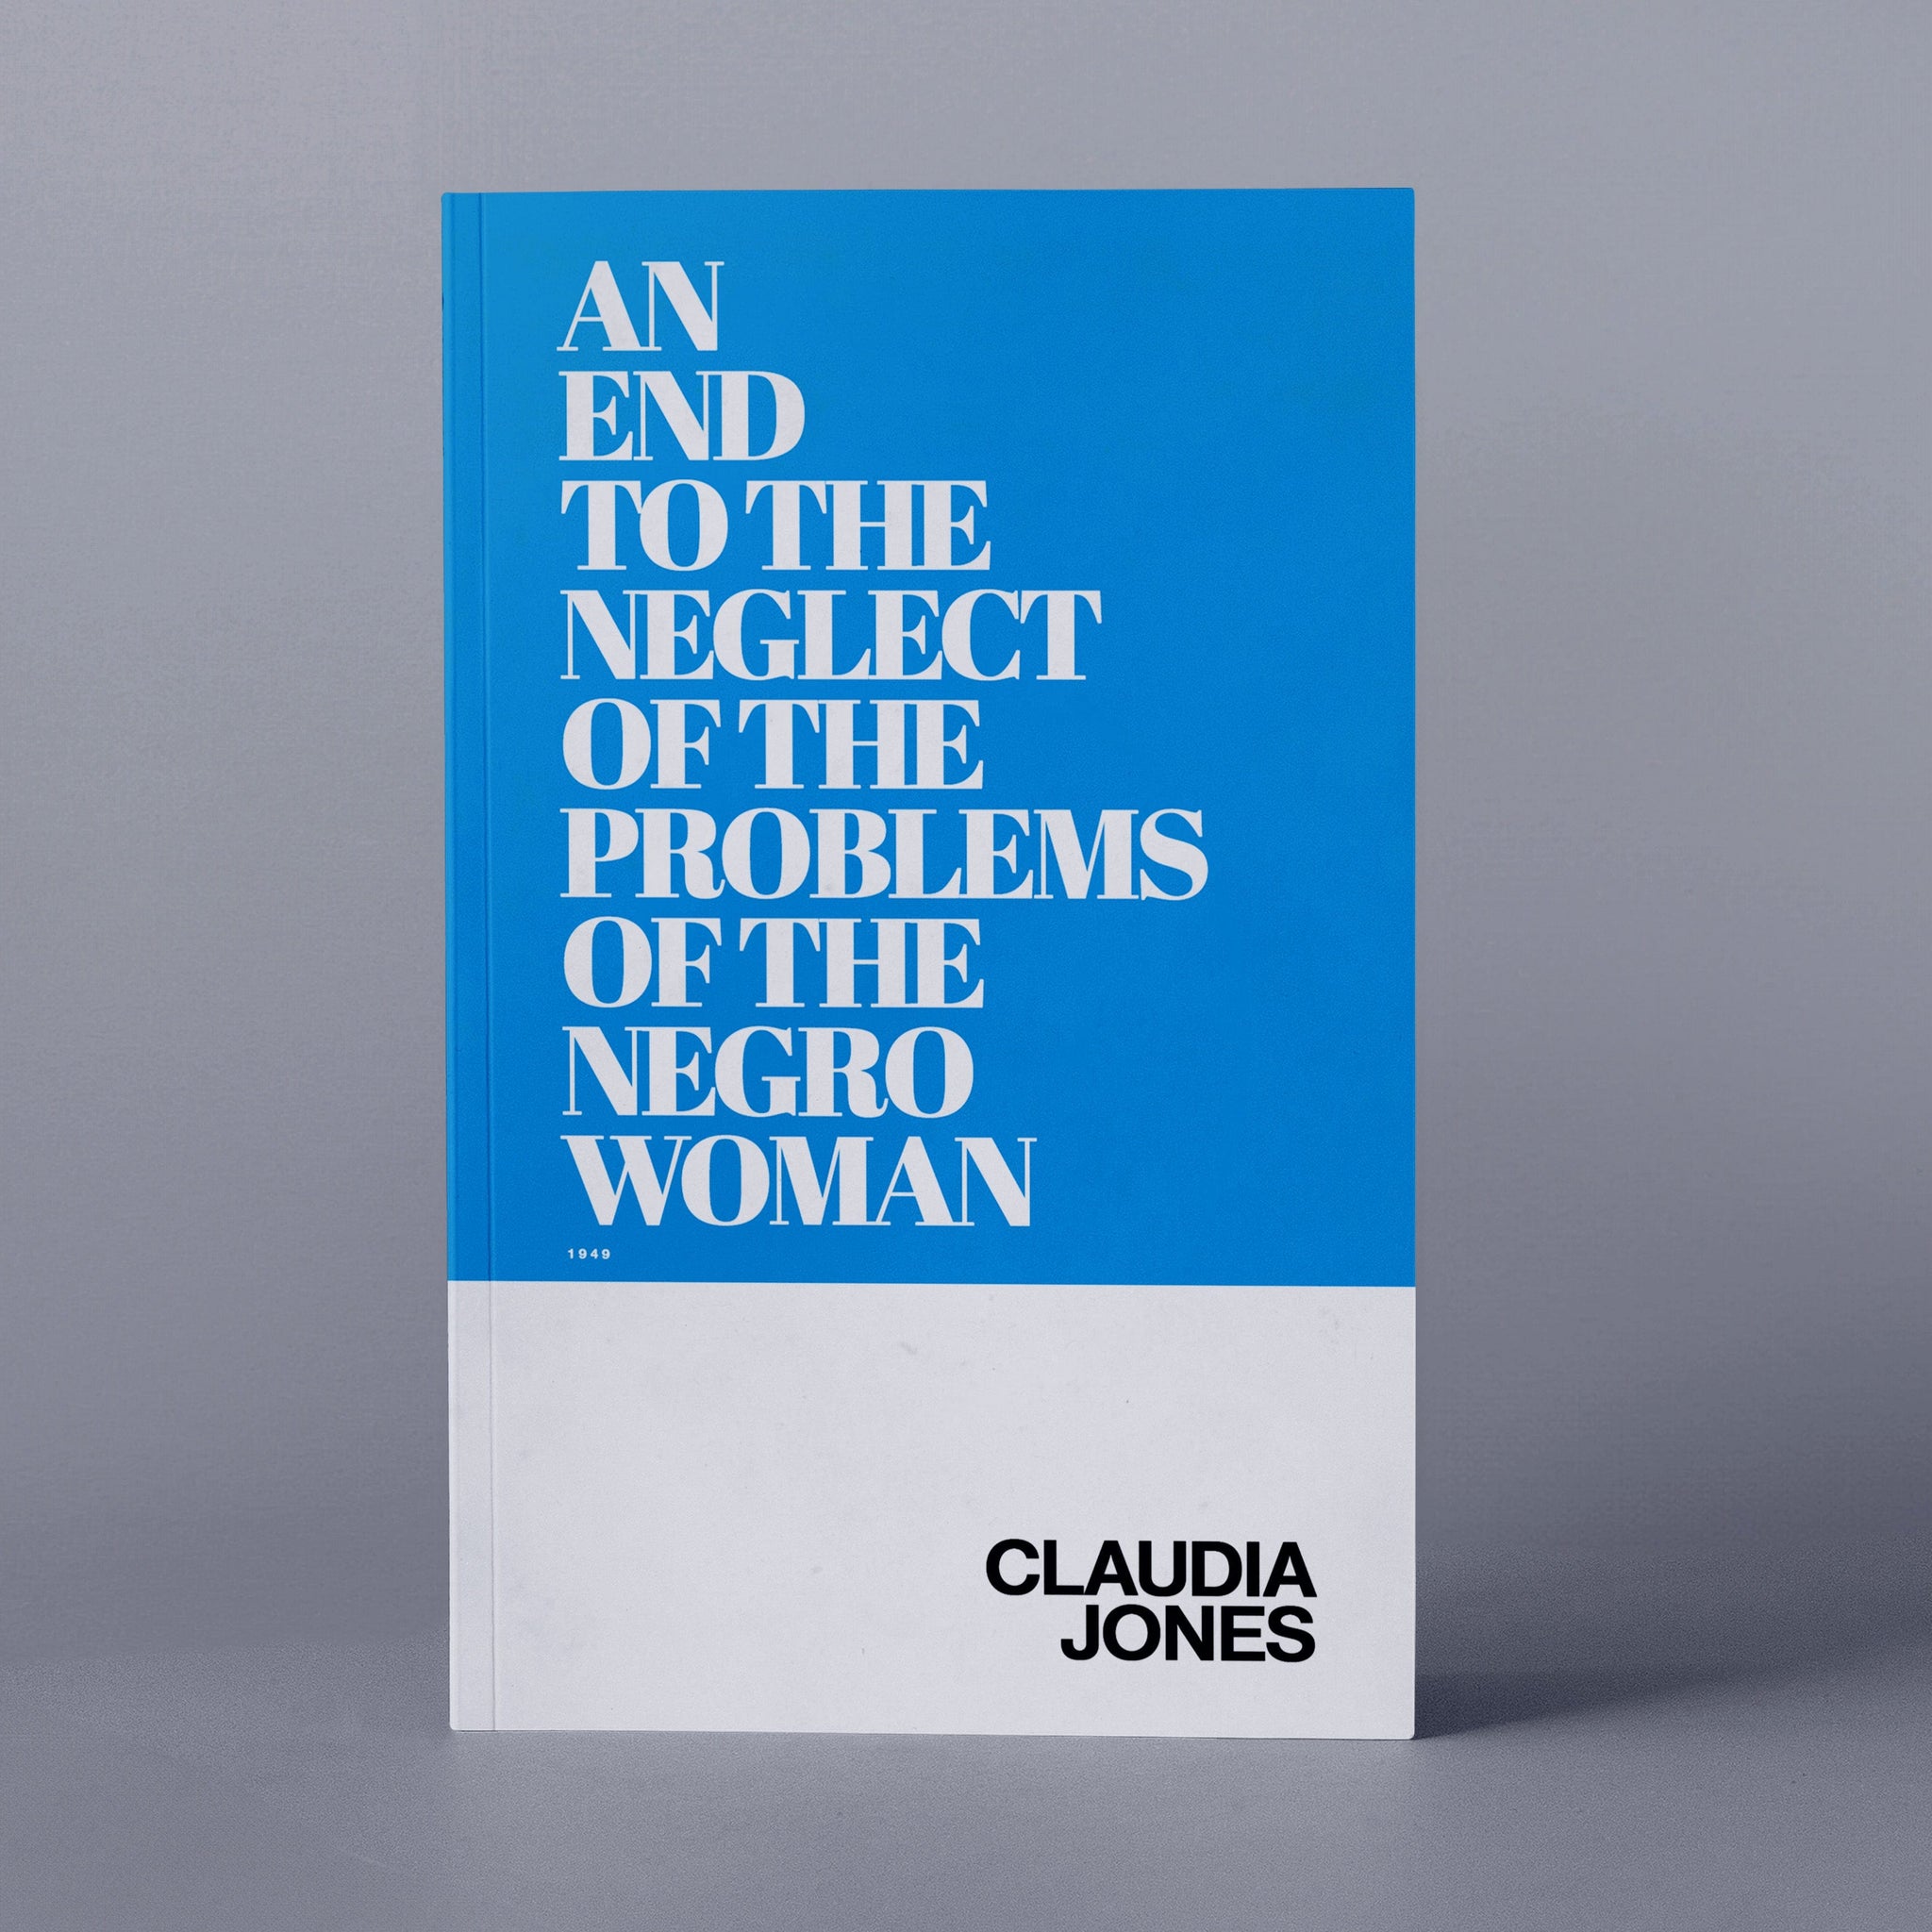 1949: An End to the Neglect of the Problems of the Negro Woman (Claudia Jones)